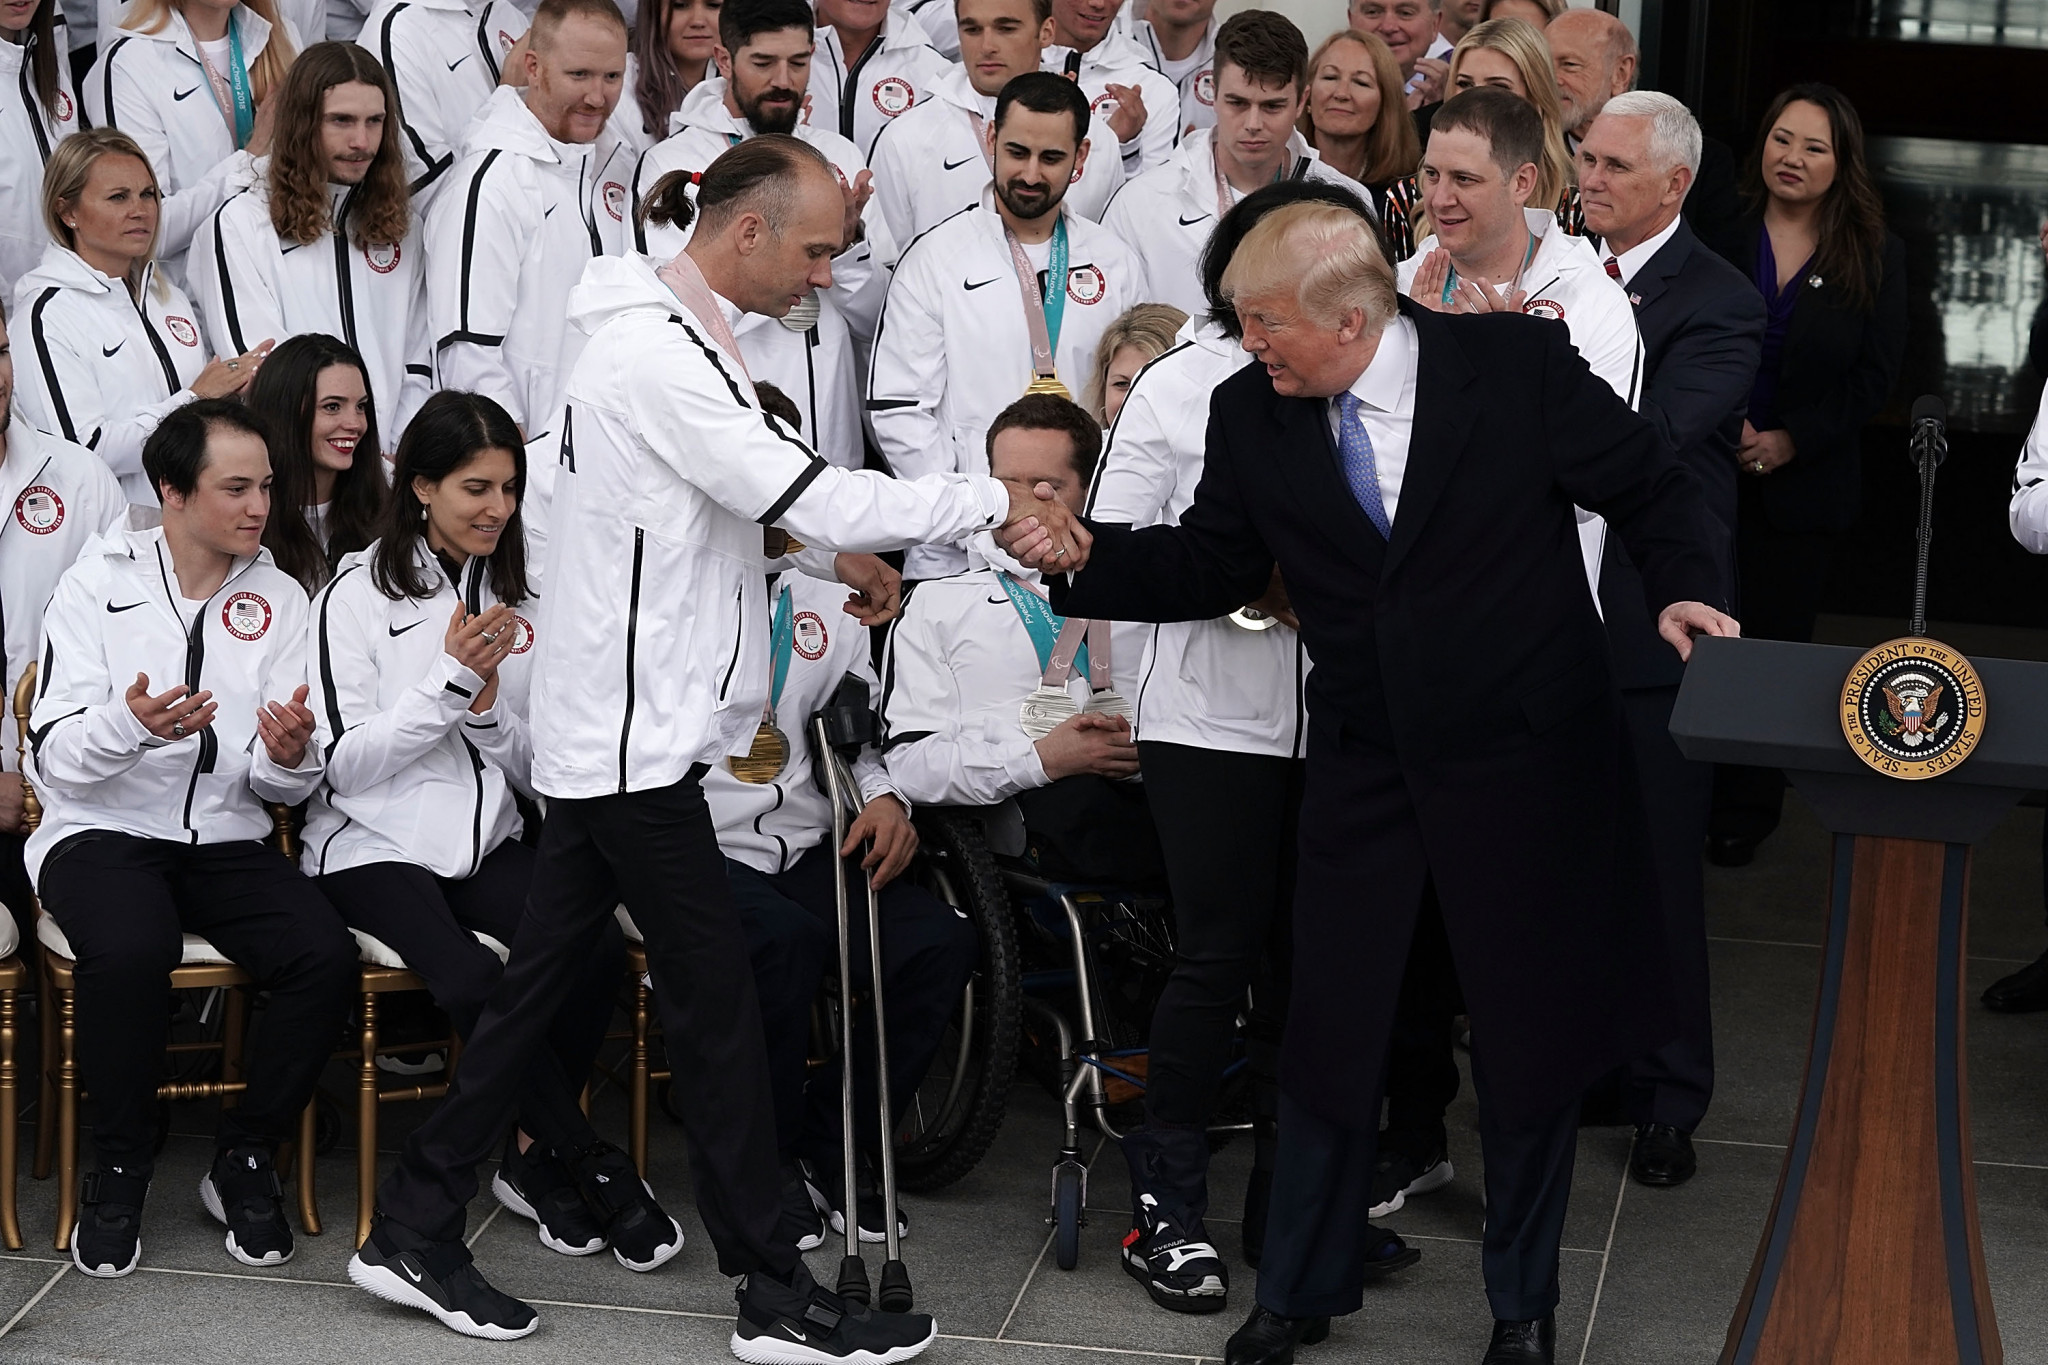 President Donald Trump helps skier Andy Soule walk towards the podium during the ceremony at the White House ©Getty Images